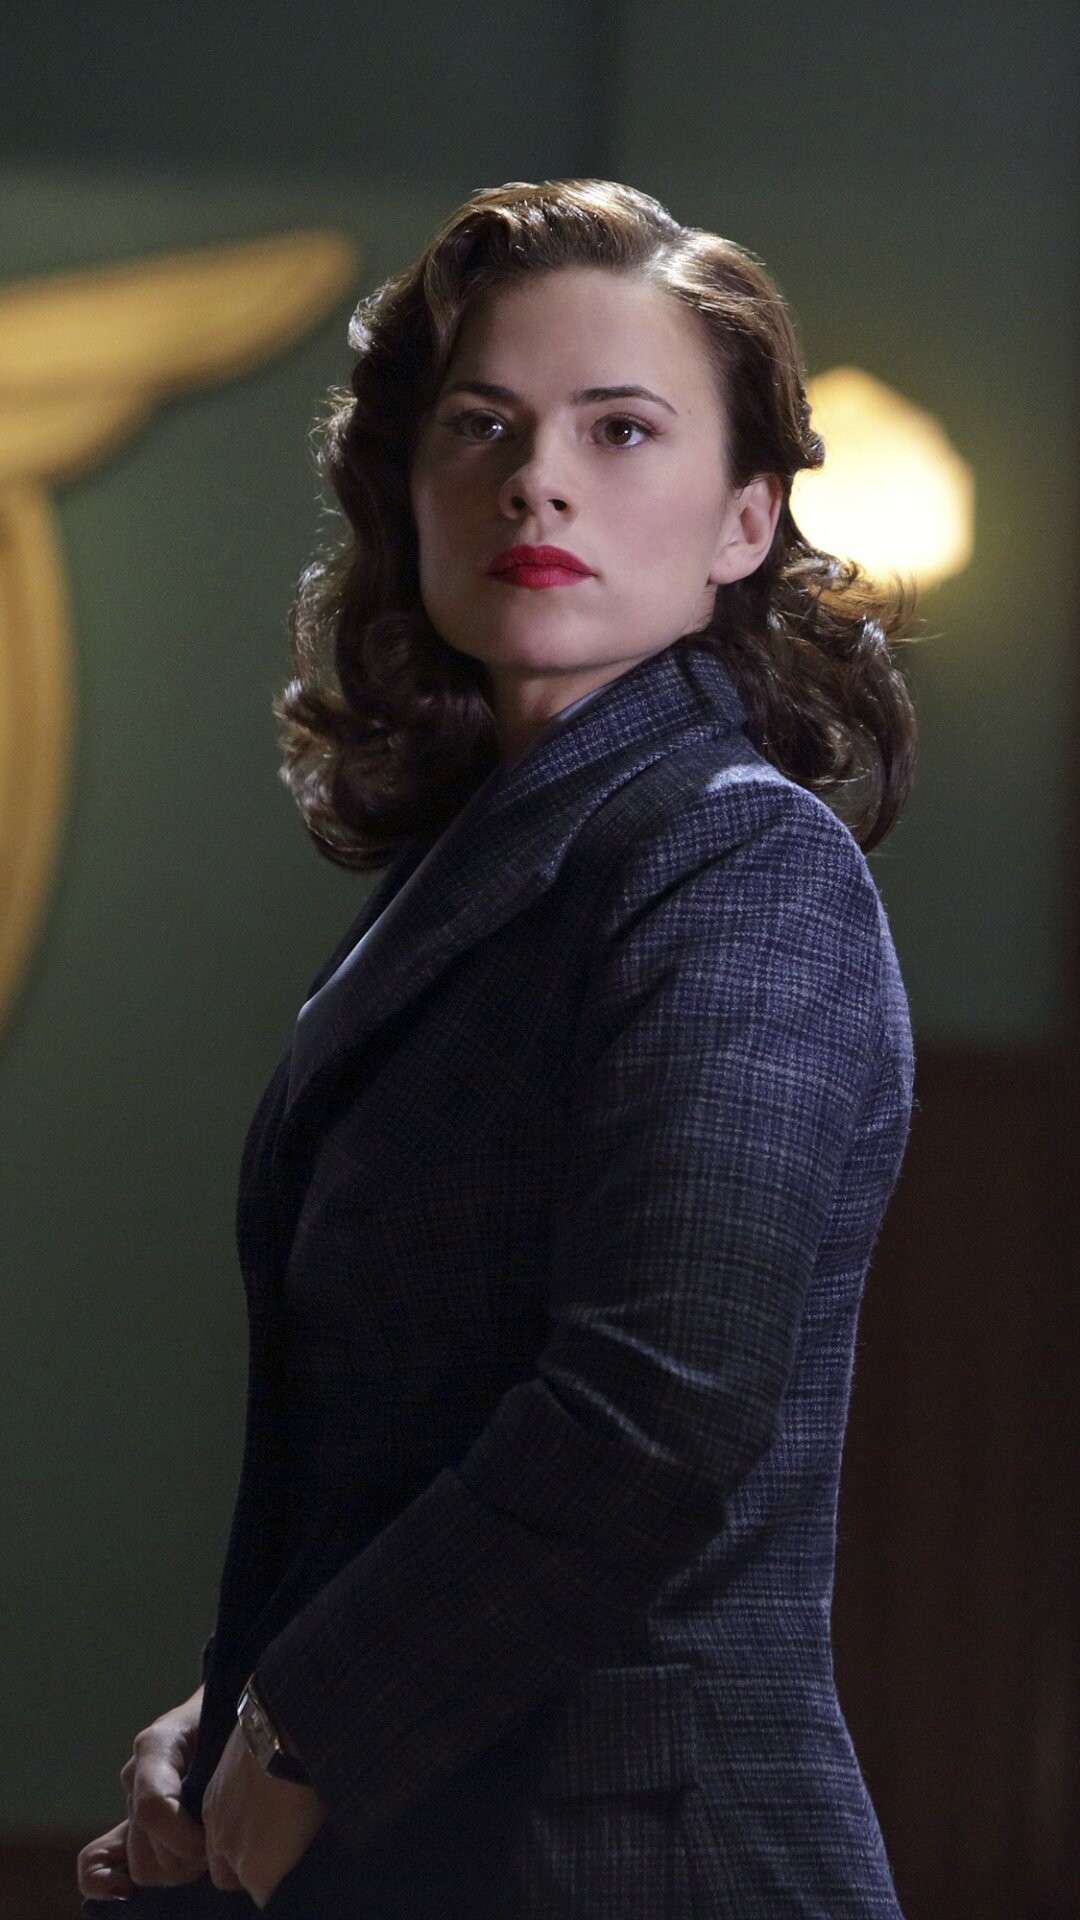 Hayley Atwell: TV Show, British actress who portrayed Agent Peggy Carter in the Marvel Cinematic Universe. 1080x1920 Full HD Wallpaper.